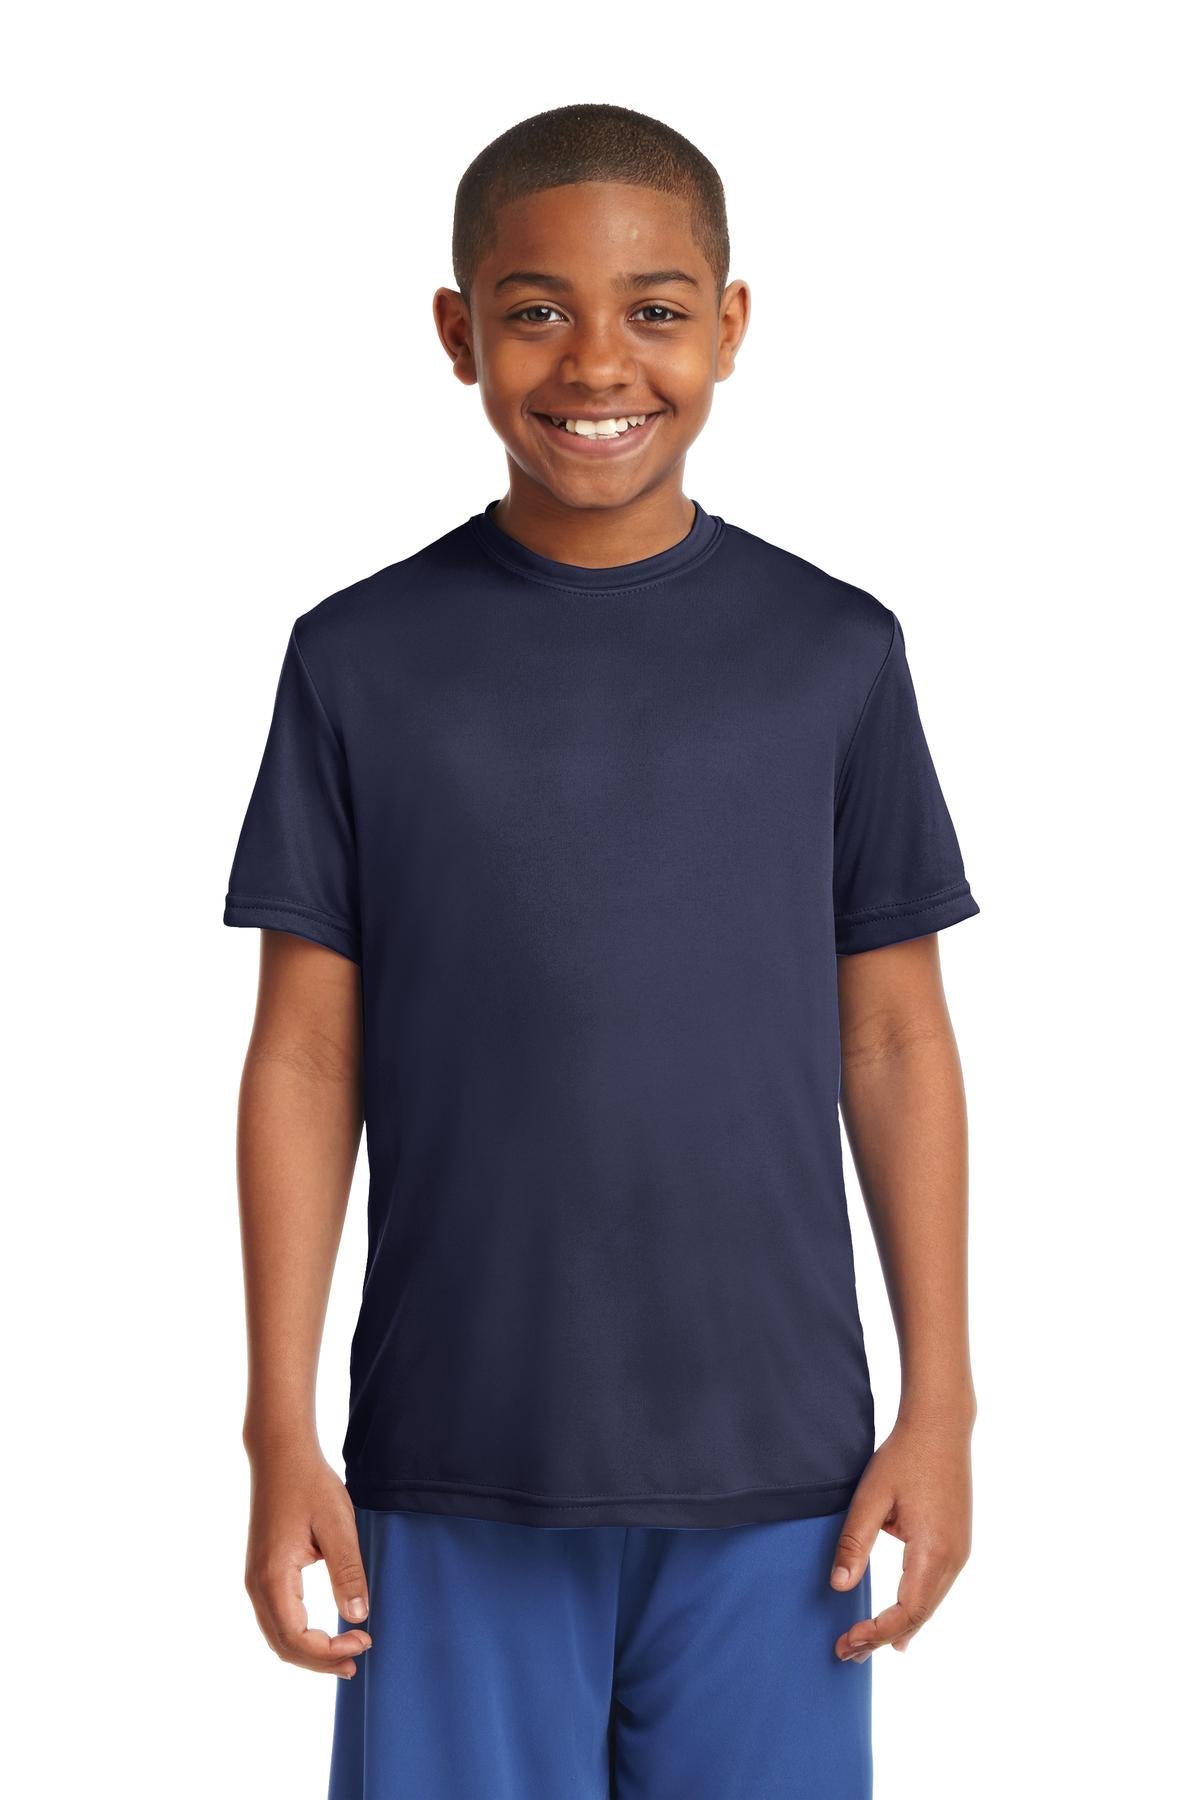 Sport-Tek® Youth PosiCharge® Competitor™ Tee. YST350 [True Navy] - DFW Impression